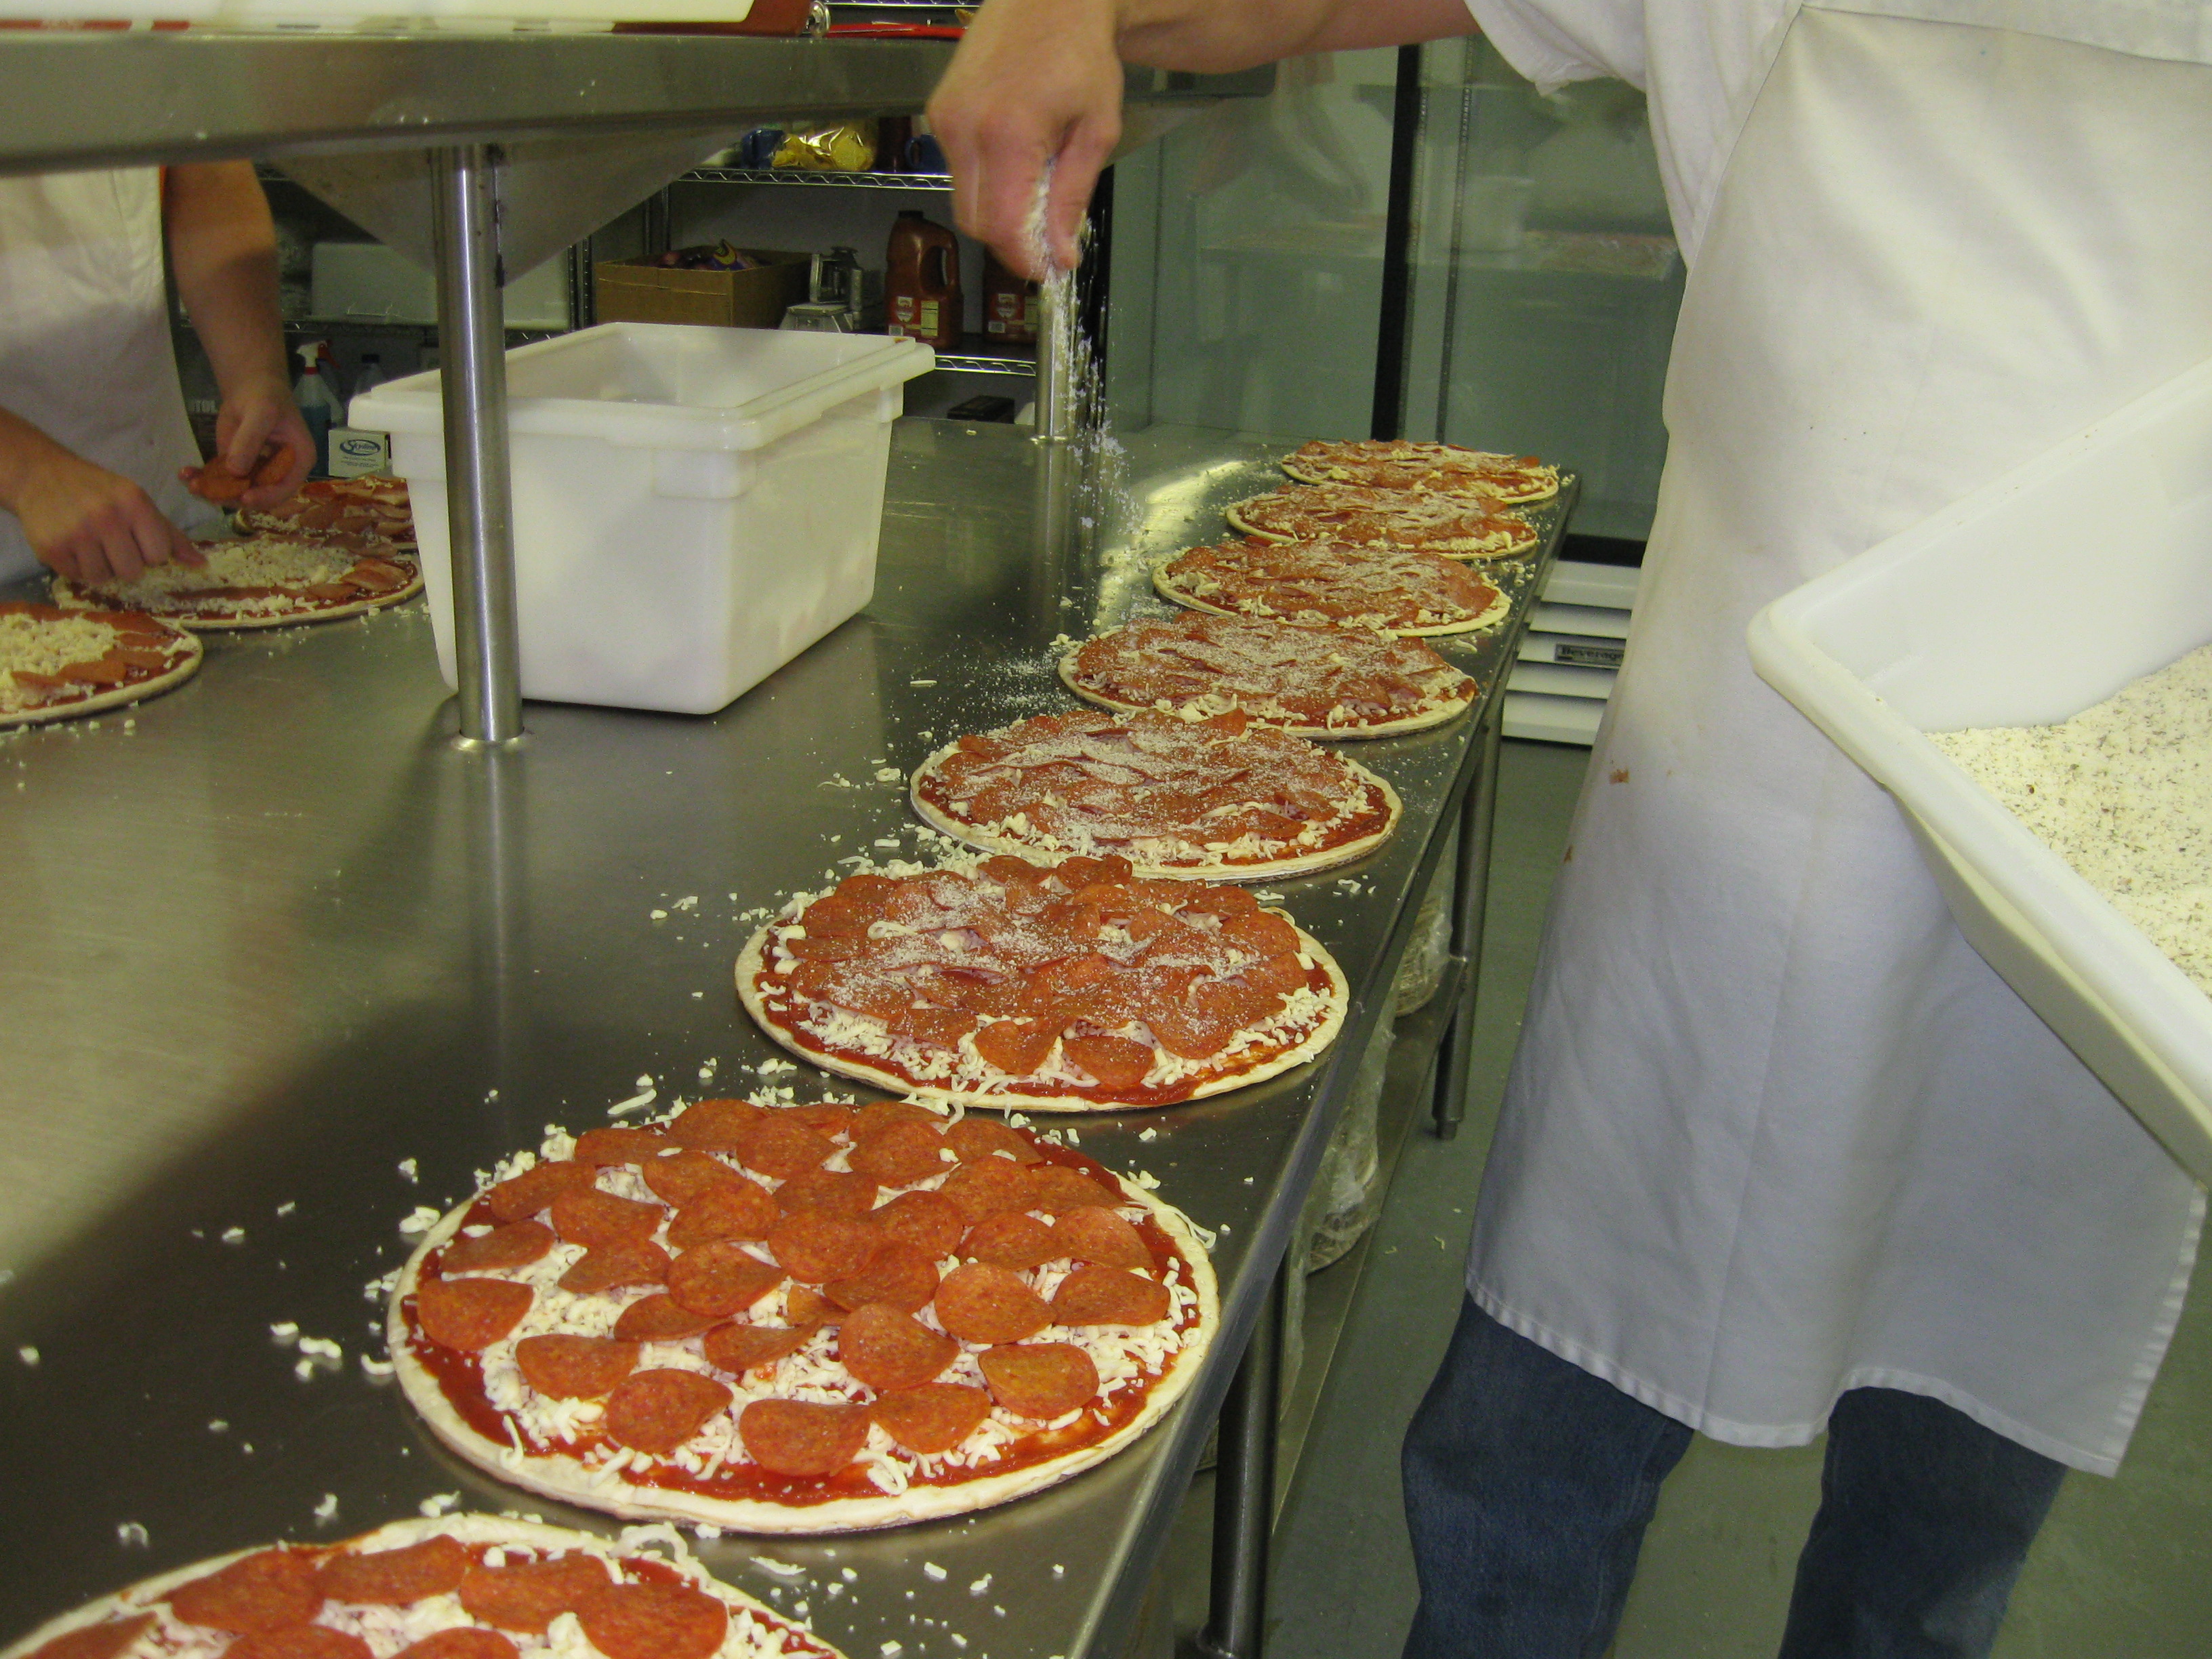 The first batches of Dogtown Pizza